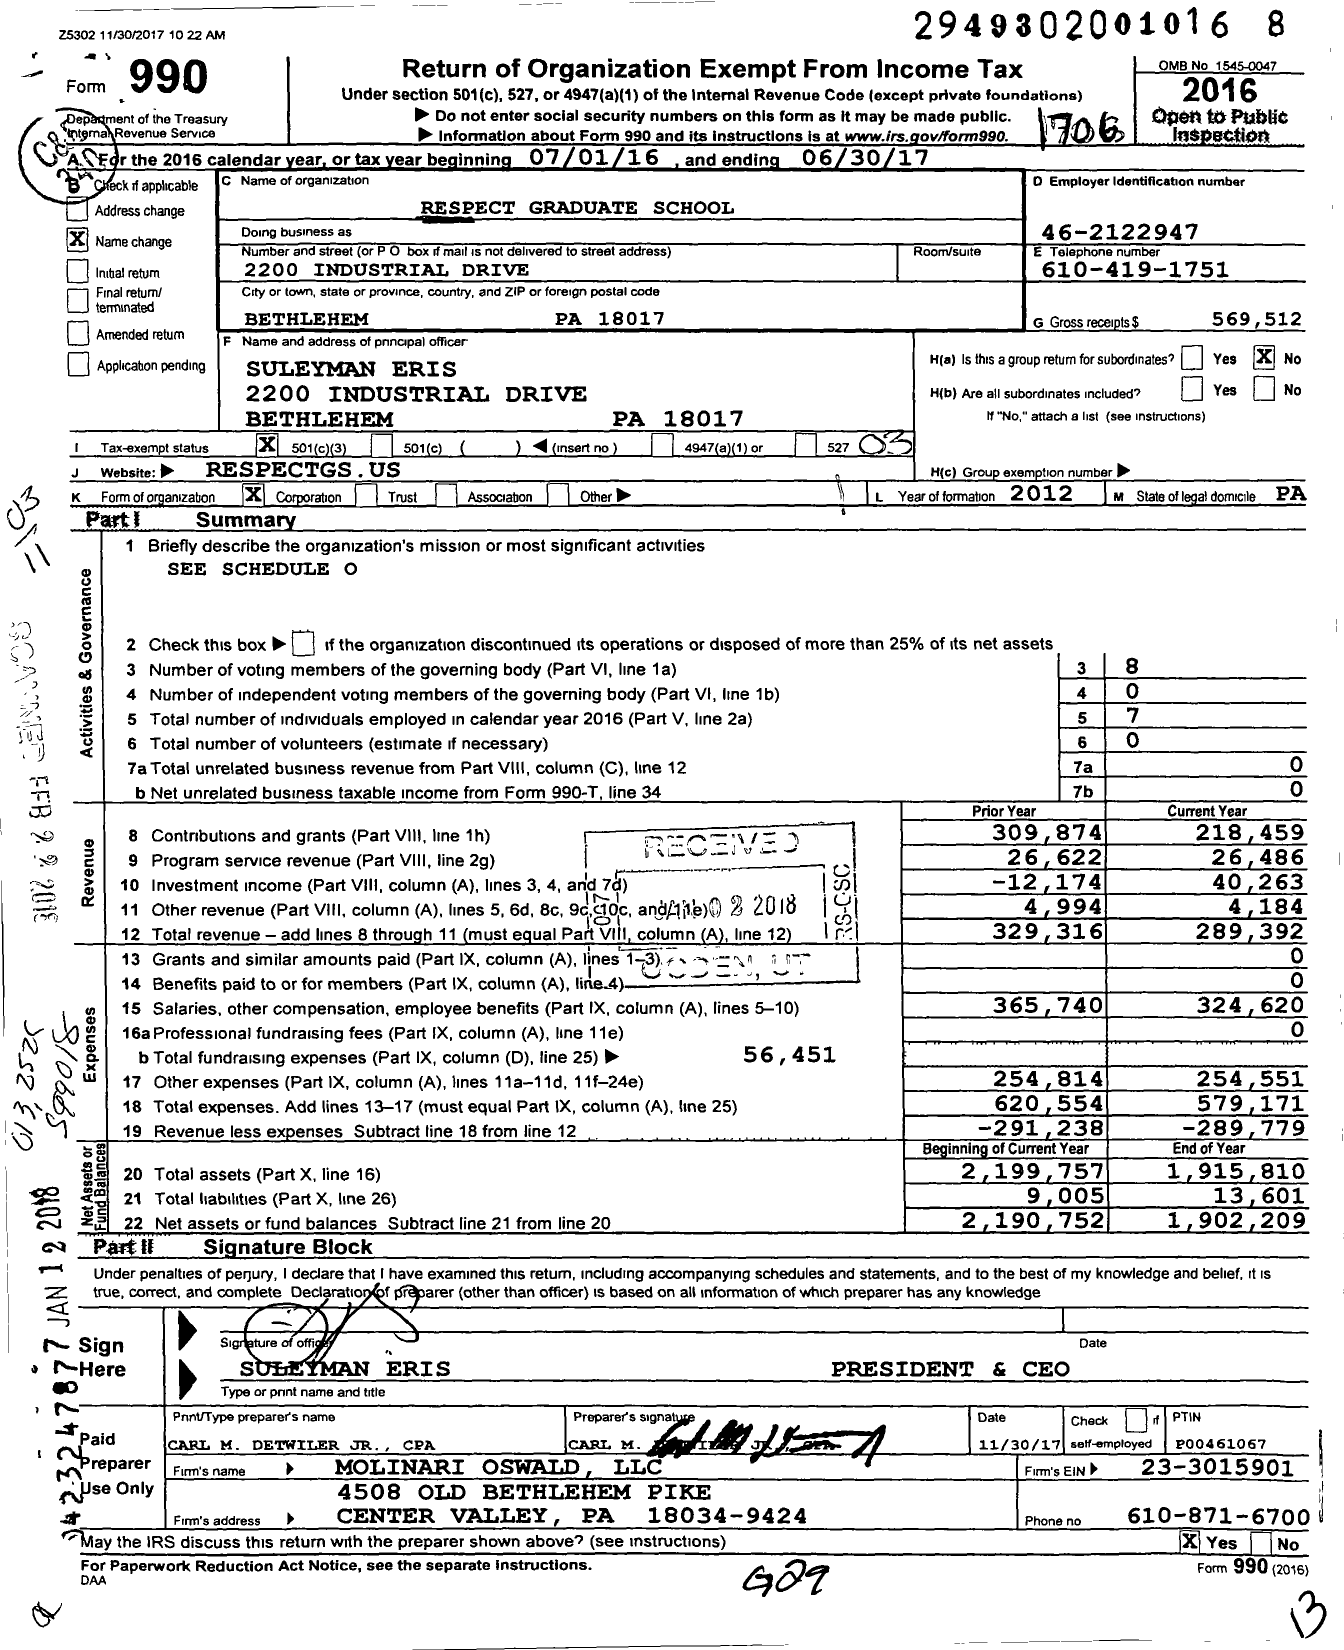 Image of first page of 2016 Form 990 for Respect Graduate School